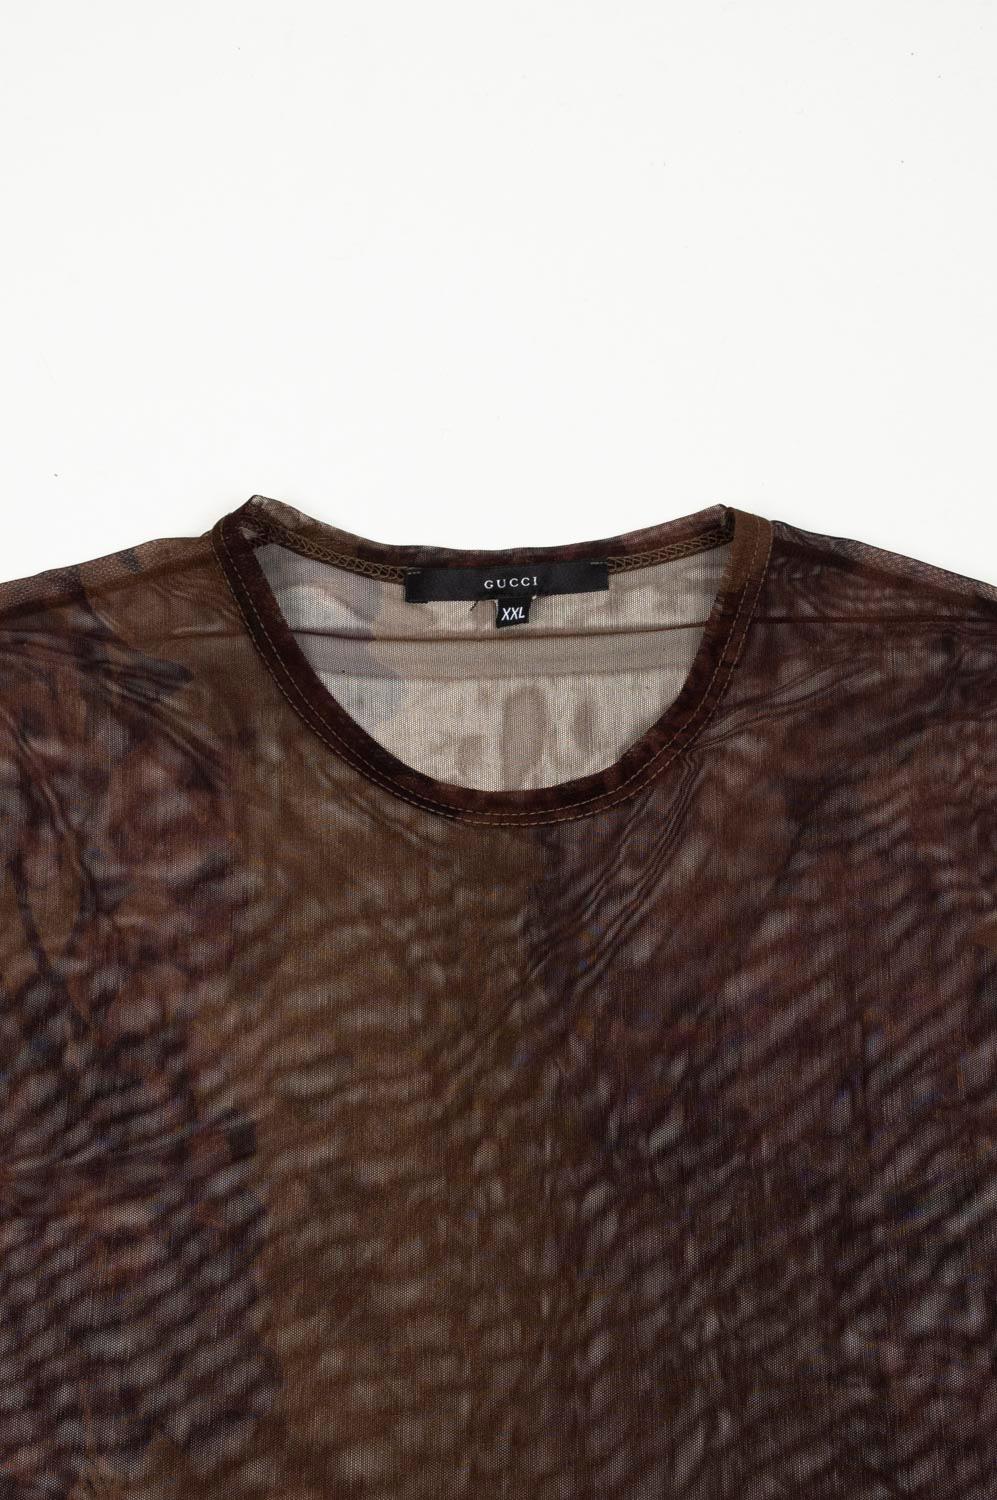 Check my other listings. Have many more designer clothes for sale. Open to any offers.
Item for sale is 100% genuine Gucci Floral Transparent Men T-Shirt, S507
Color: Brown
Material: No care label/ nylon blend
Tag size: XXL S507
This t shirt is